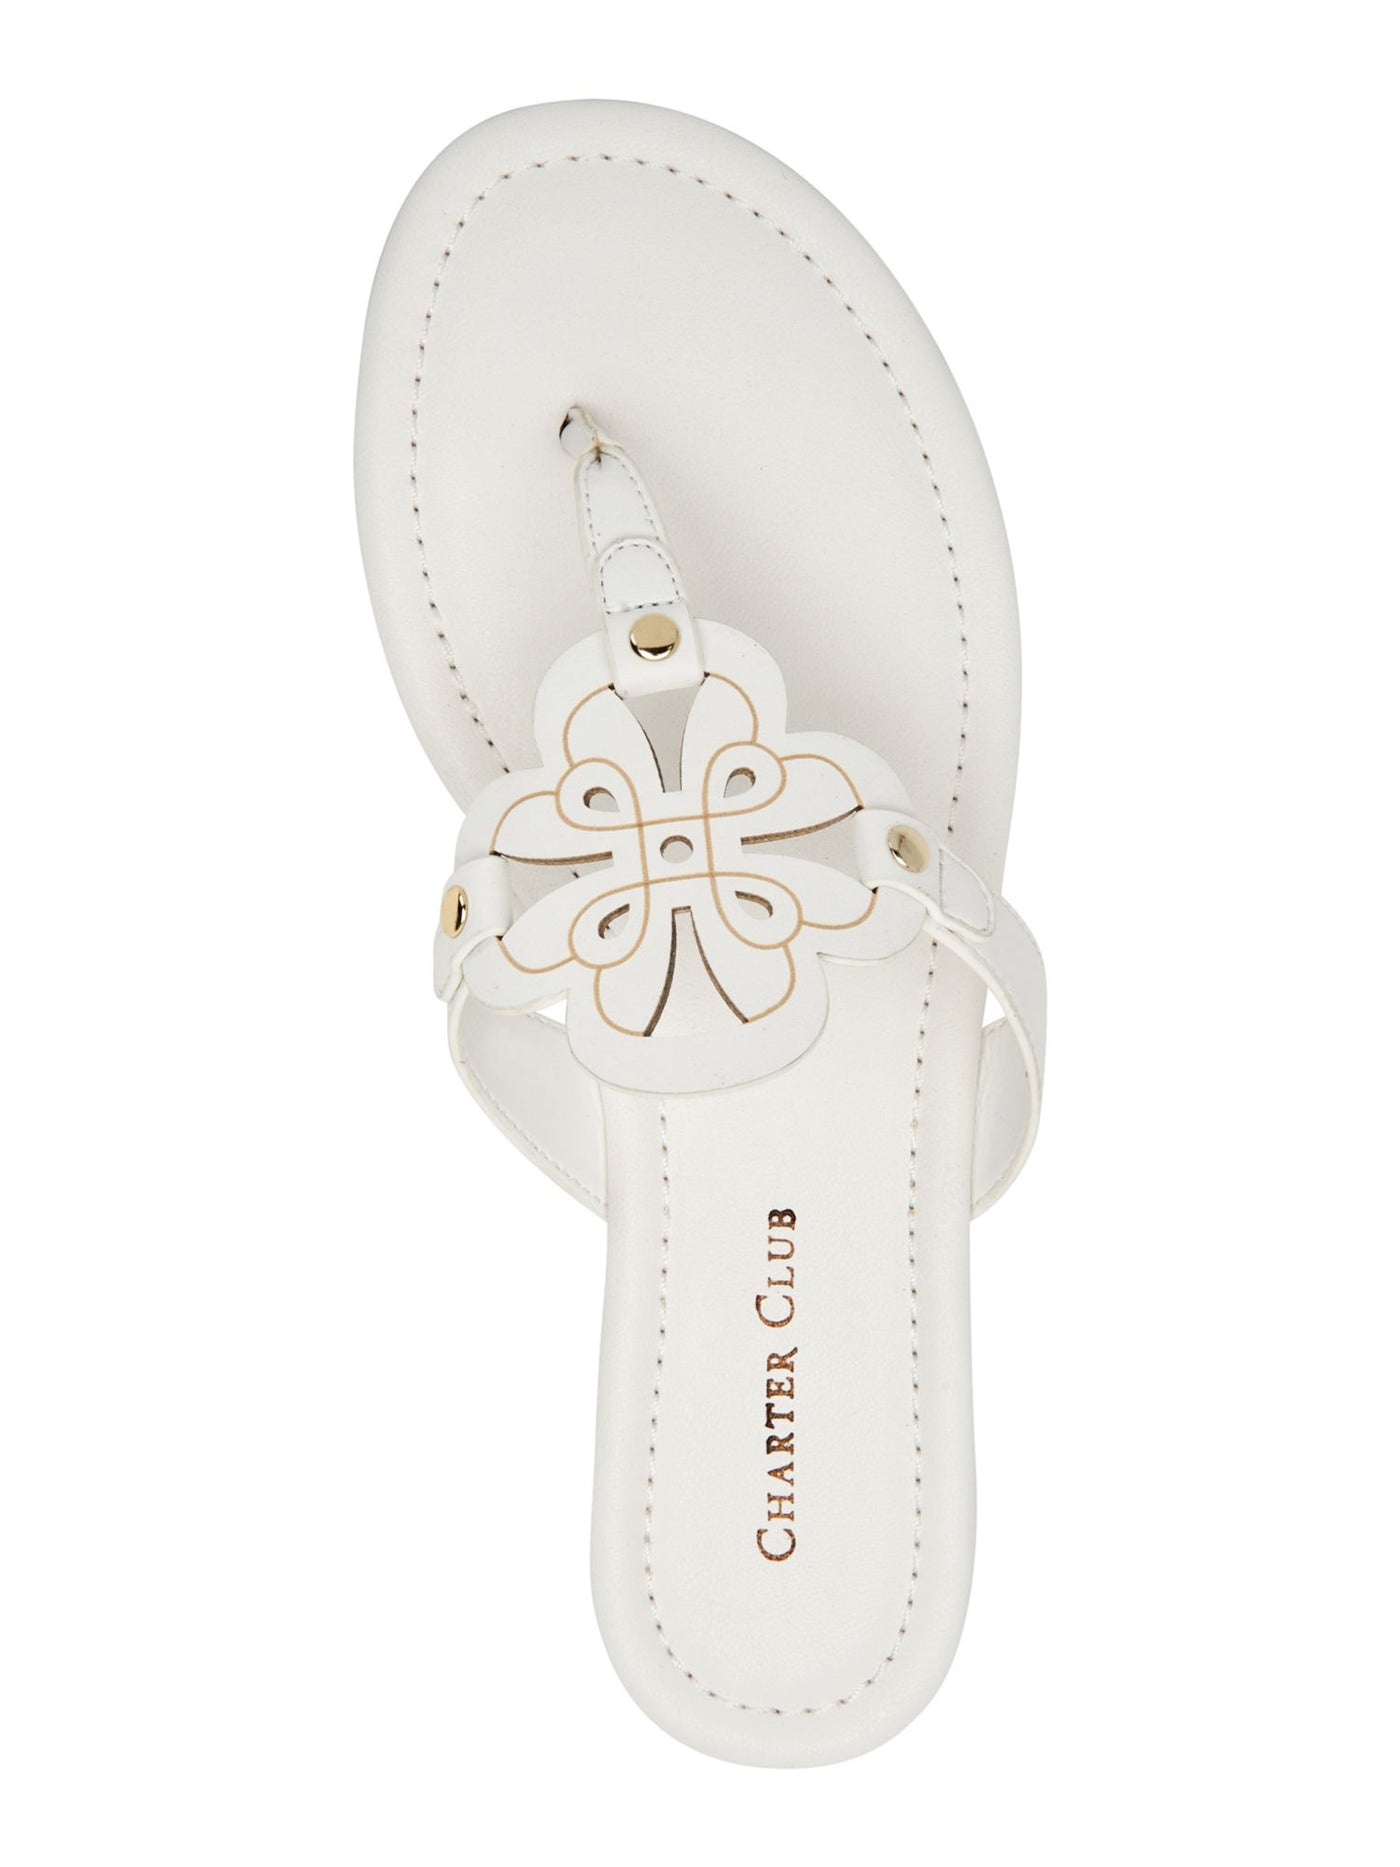 CHARTER CLUB Womens White Cut Out Studded Padded Ozella Round Toe Wedge Slip On Flip Flop Sandal 8.5 M